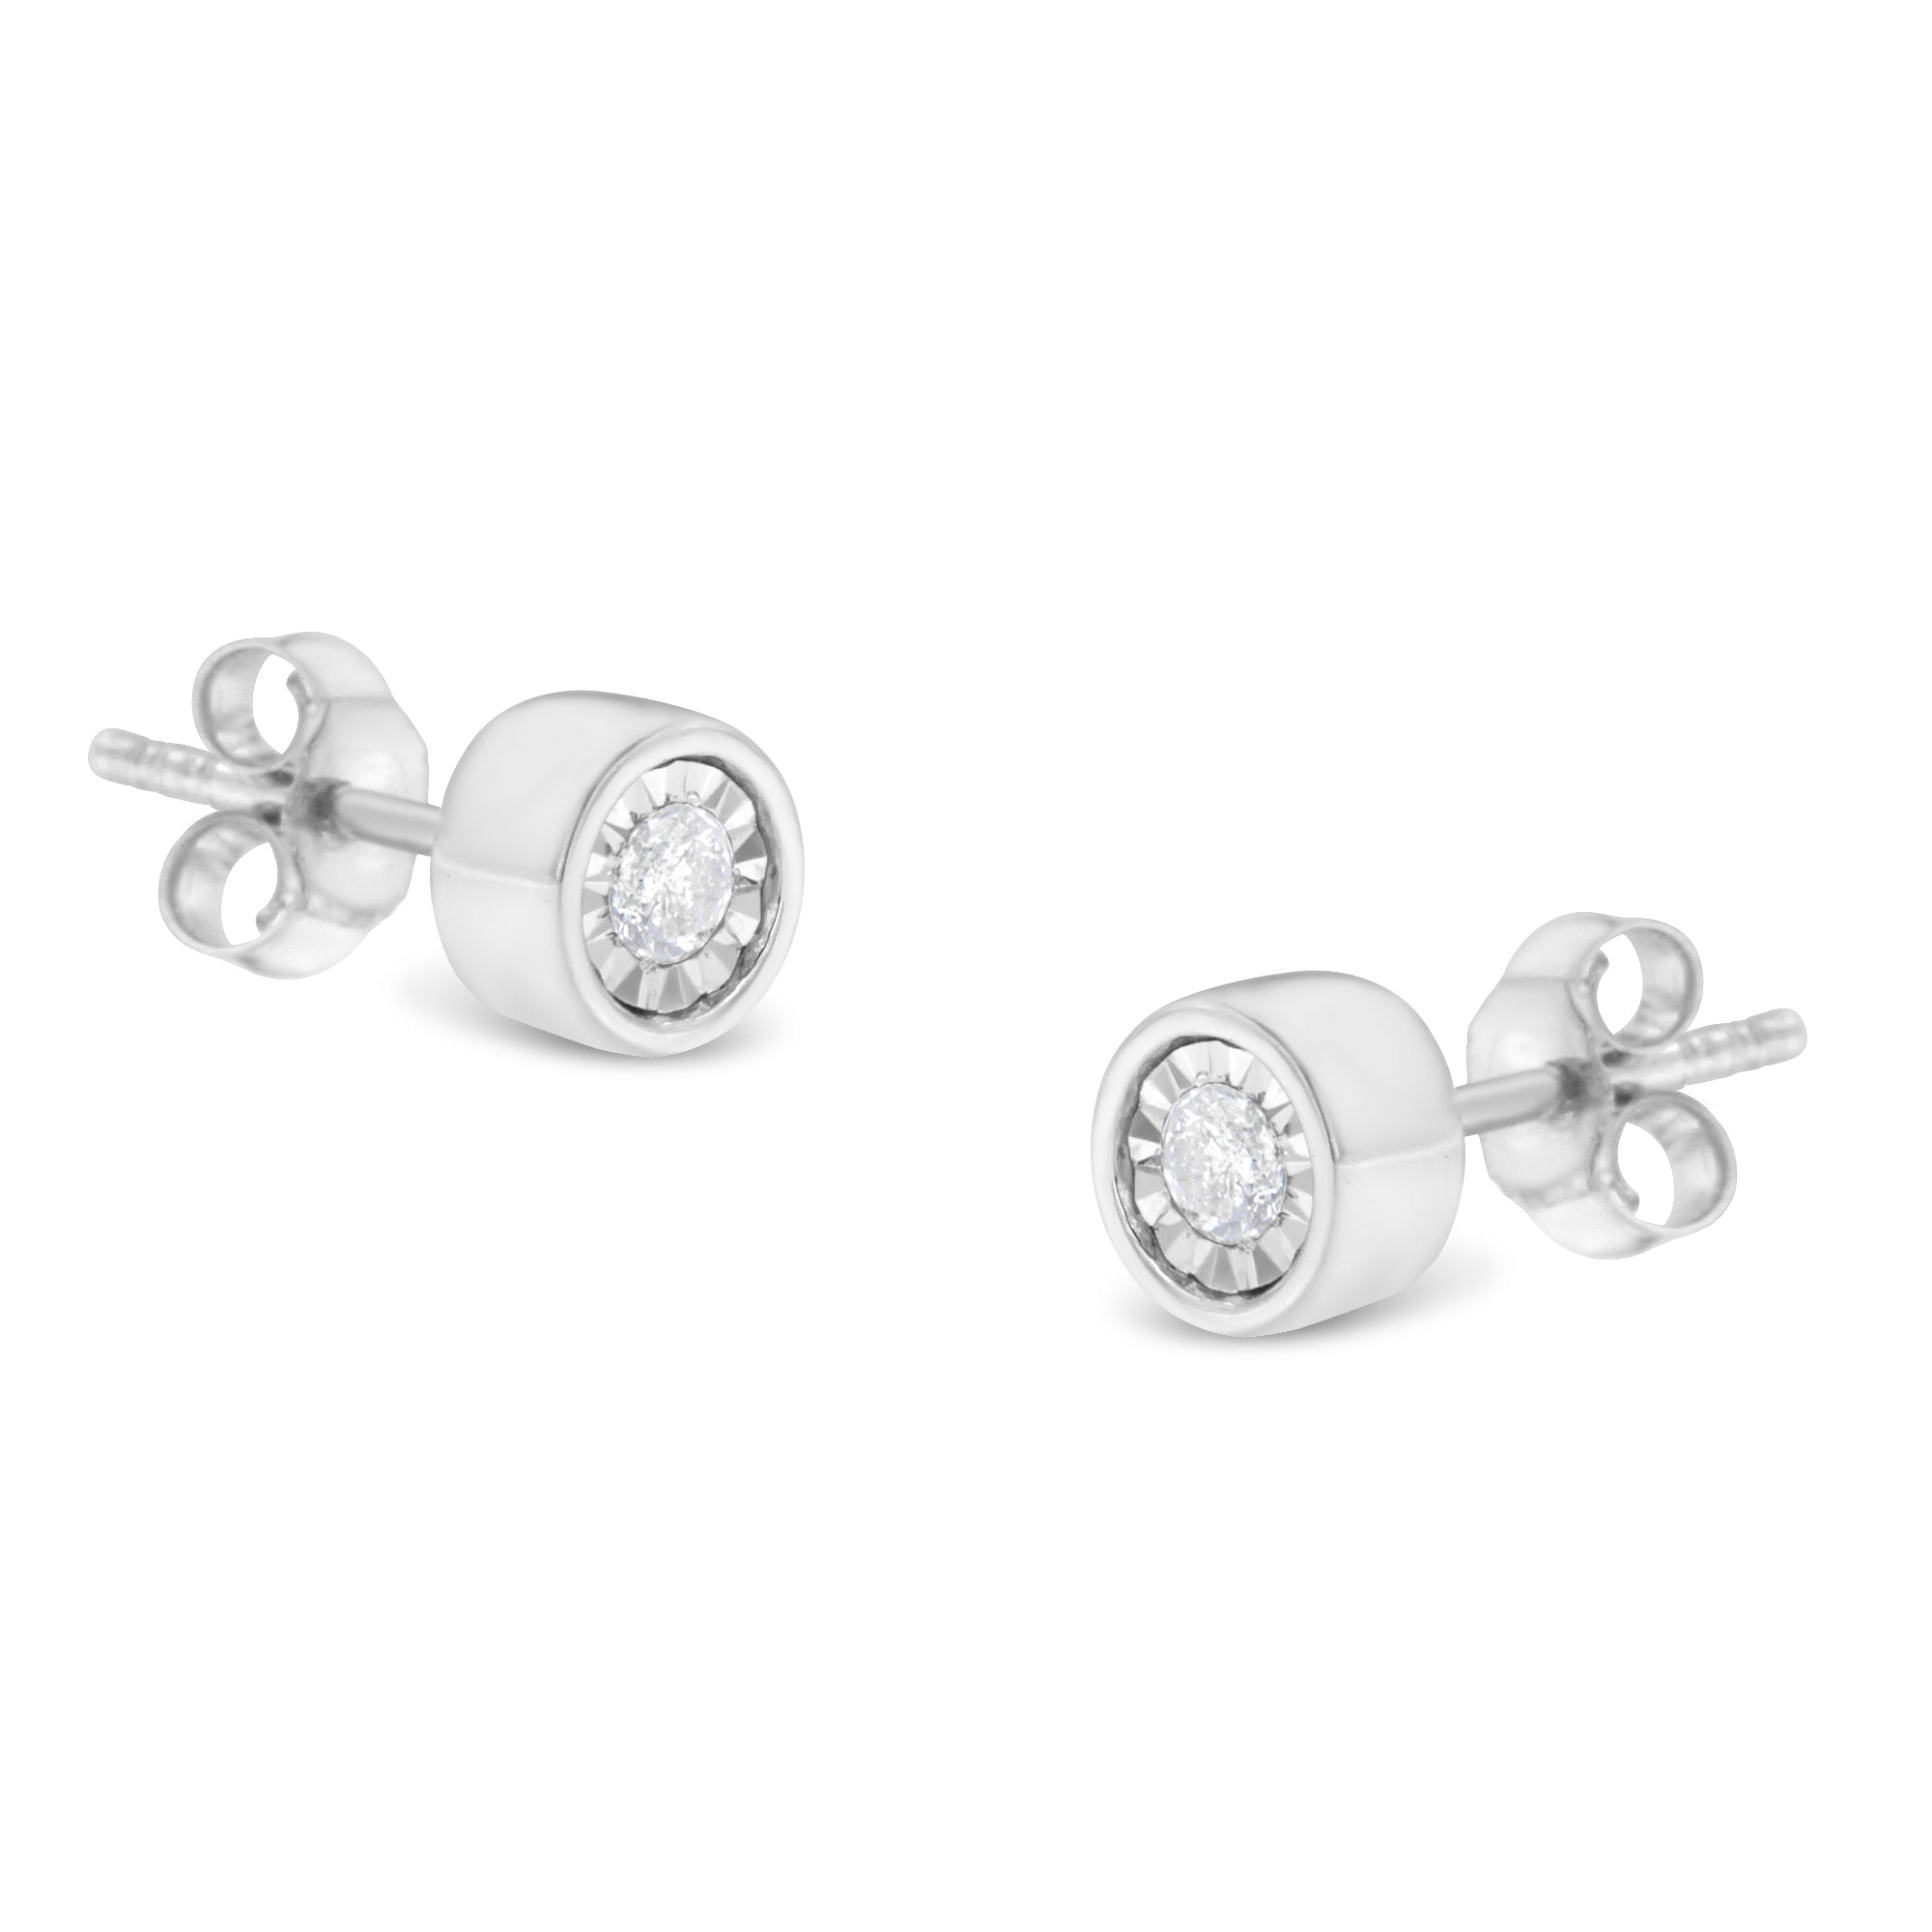 .925-Sterling-Silver-1/5-Cttw-Round-Brilliant-Cut-Near-Colorless-Diamond-Miracle-Set-Bezel-Barrel-Style-Stud-Earrings-(I-J-Color,-I2-I3-Clarity)-Earrings